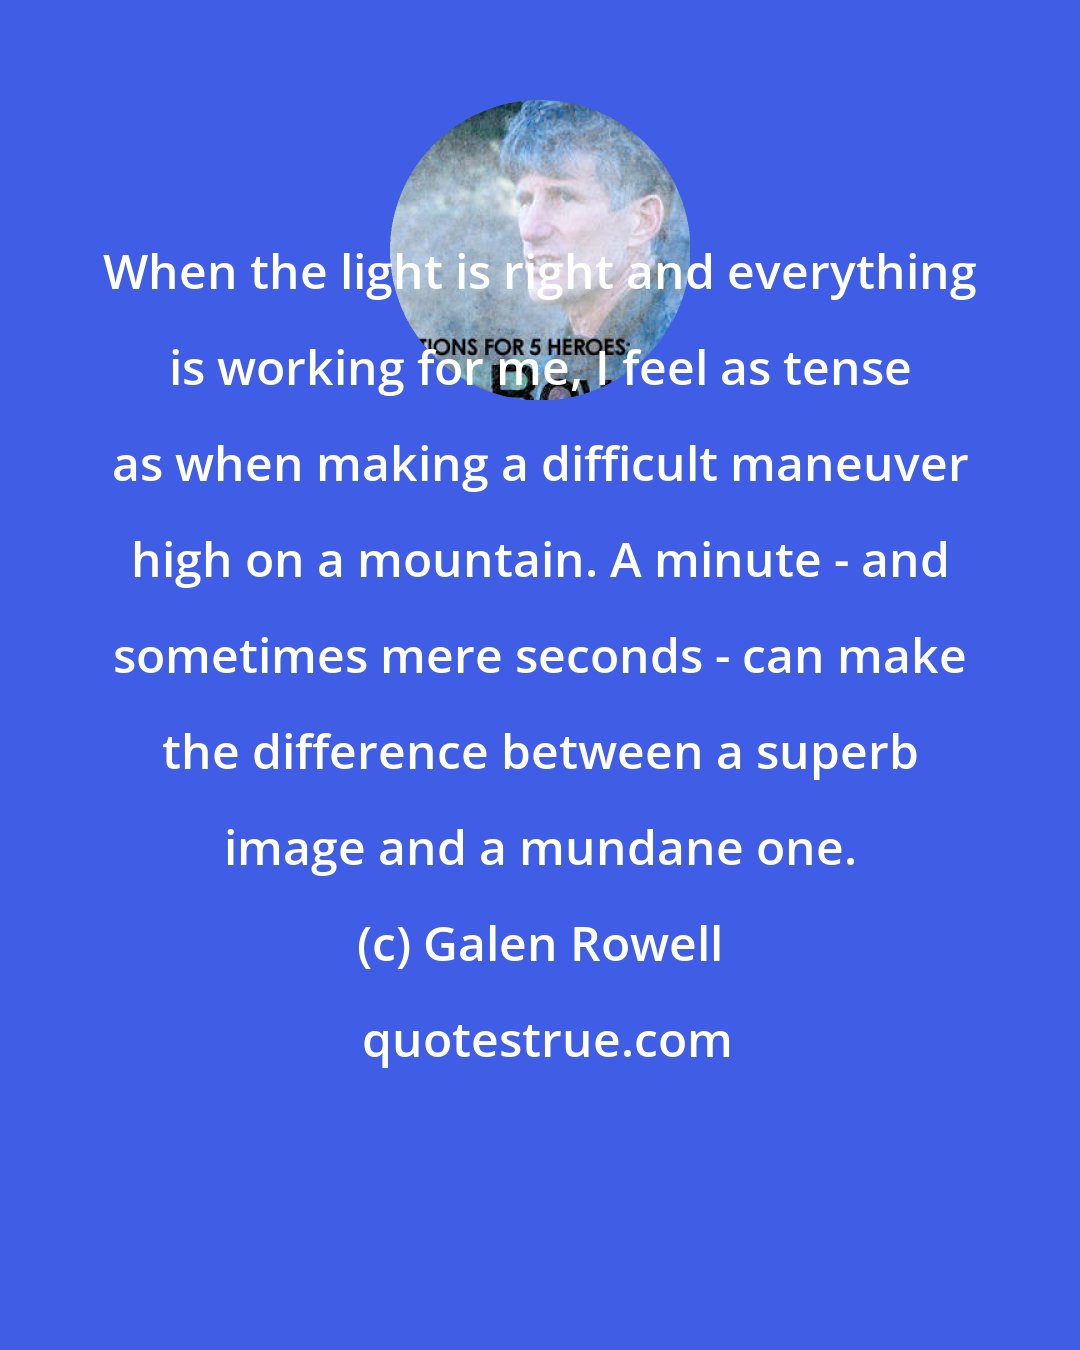 Galen Rowell: When the light is right and everything is working for me, I feel as tense as when making a difficult maneuver high on a mountain. A minute - and sometimes mere seconds - can make the difference between a superb image and a mundane one.